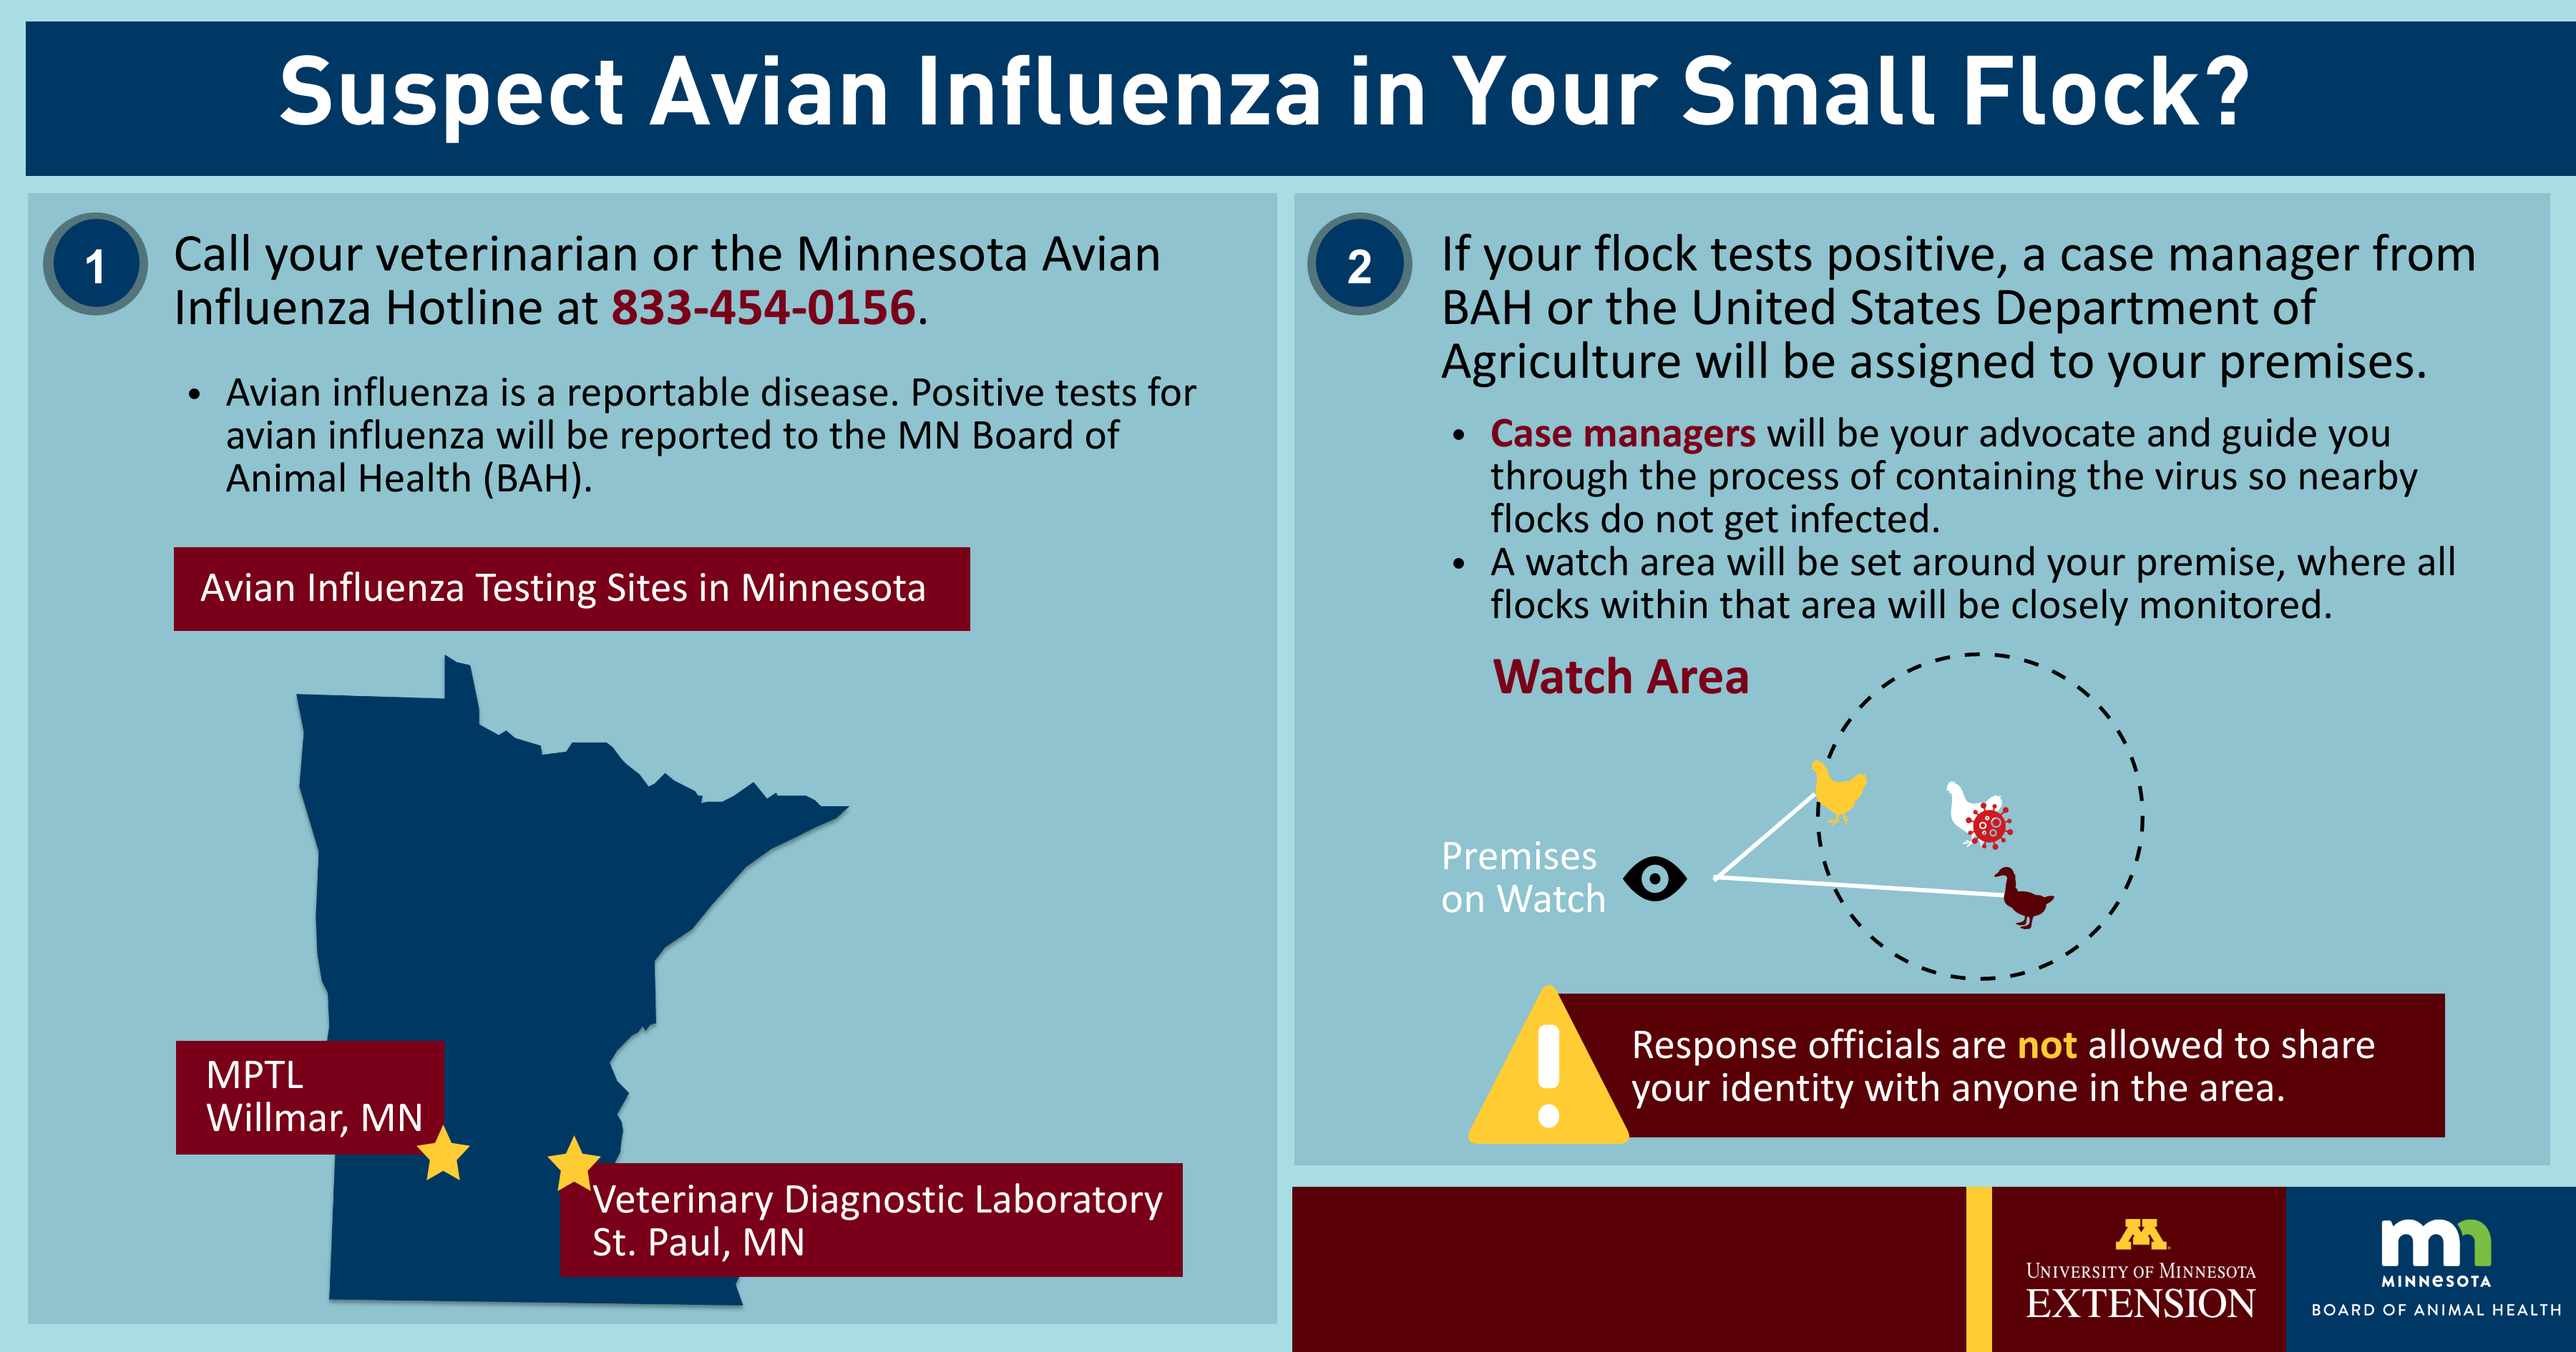 Infographic titled, "Avian Influenza in Your Flock?" See text below for content.